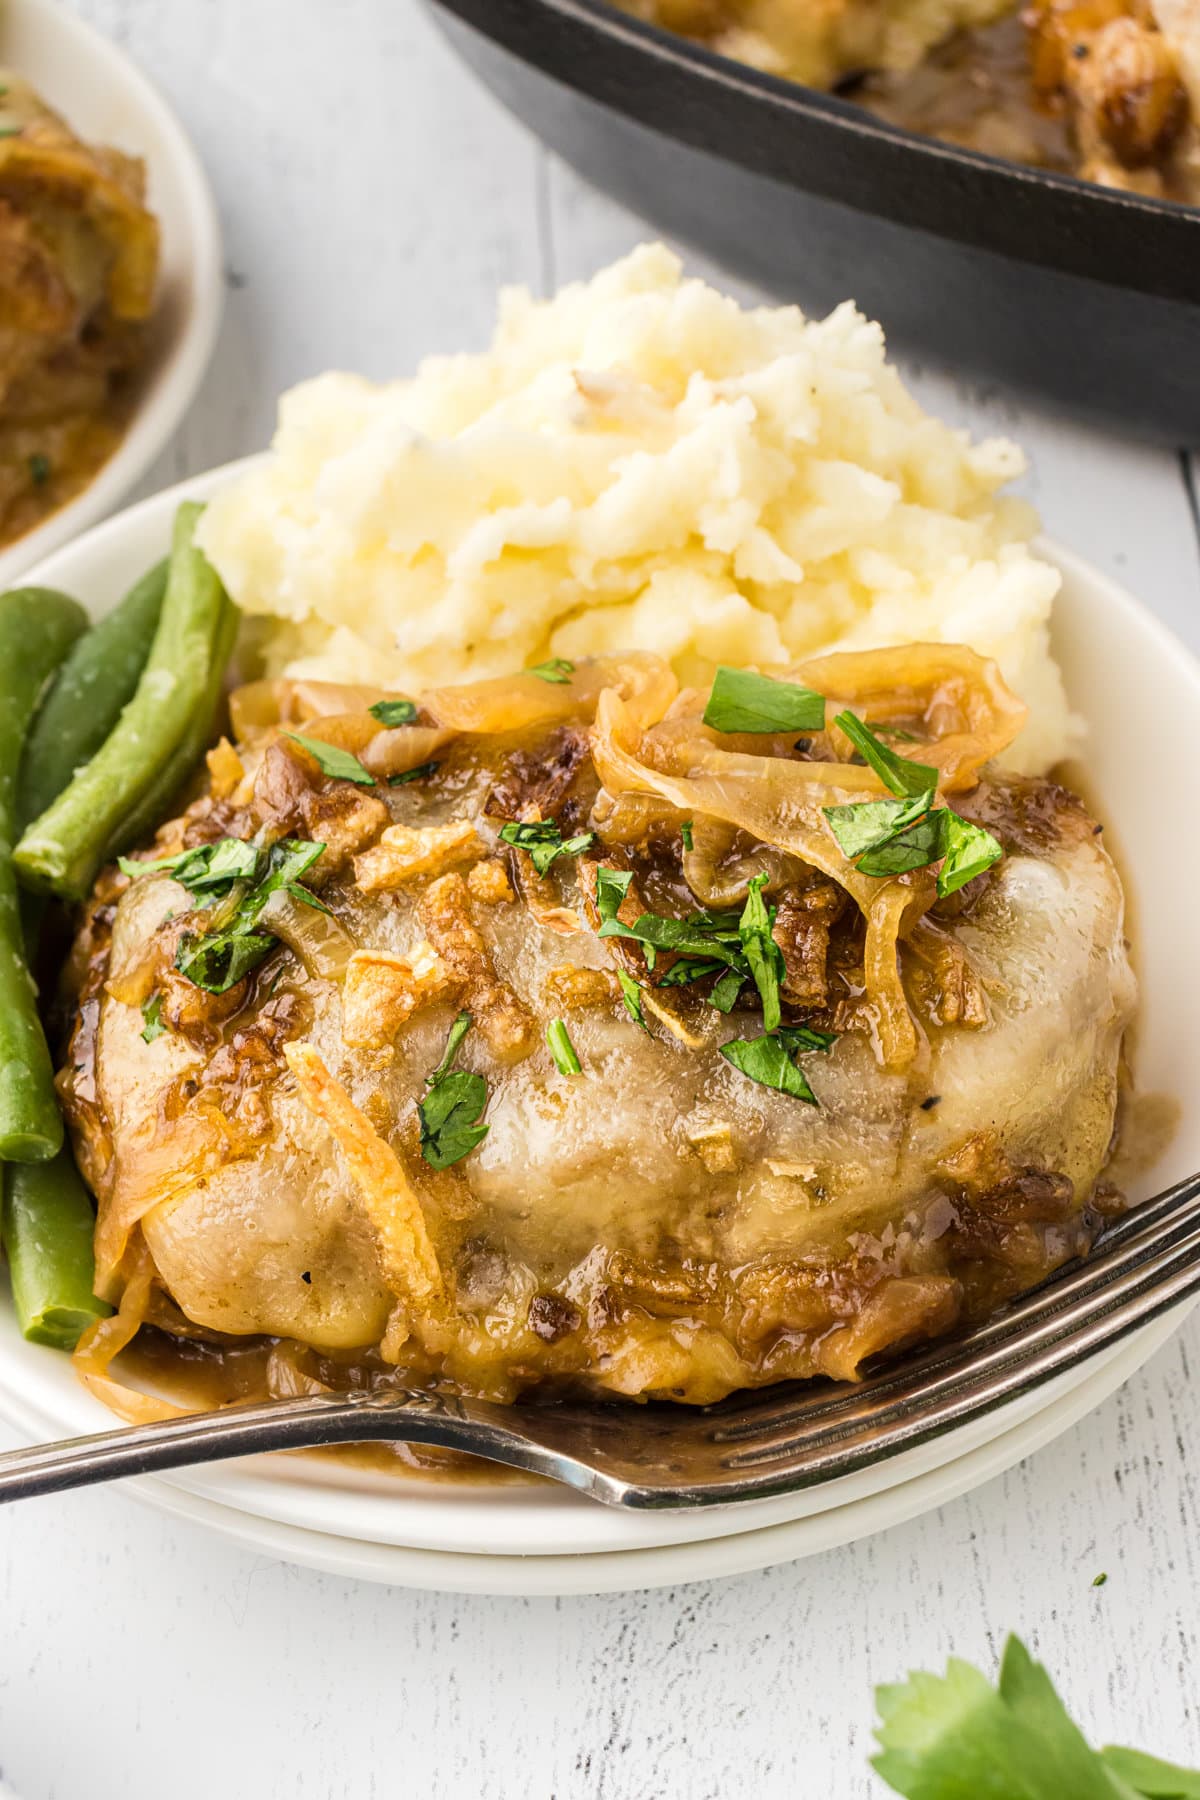 A close-up photo of a cheesy pork chop topped with caramelized onions.